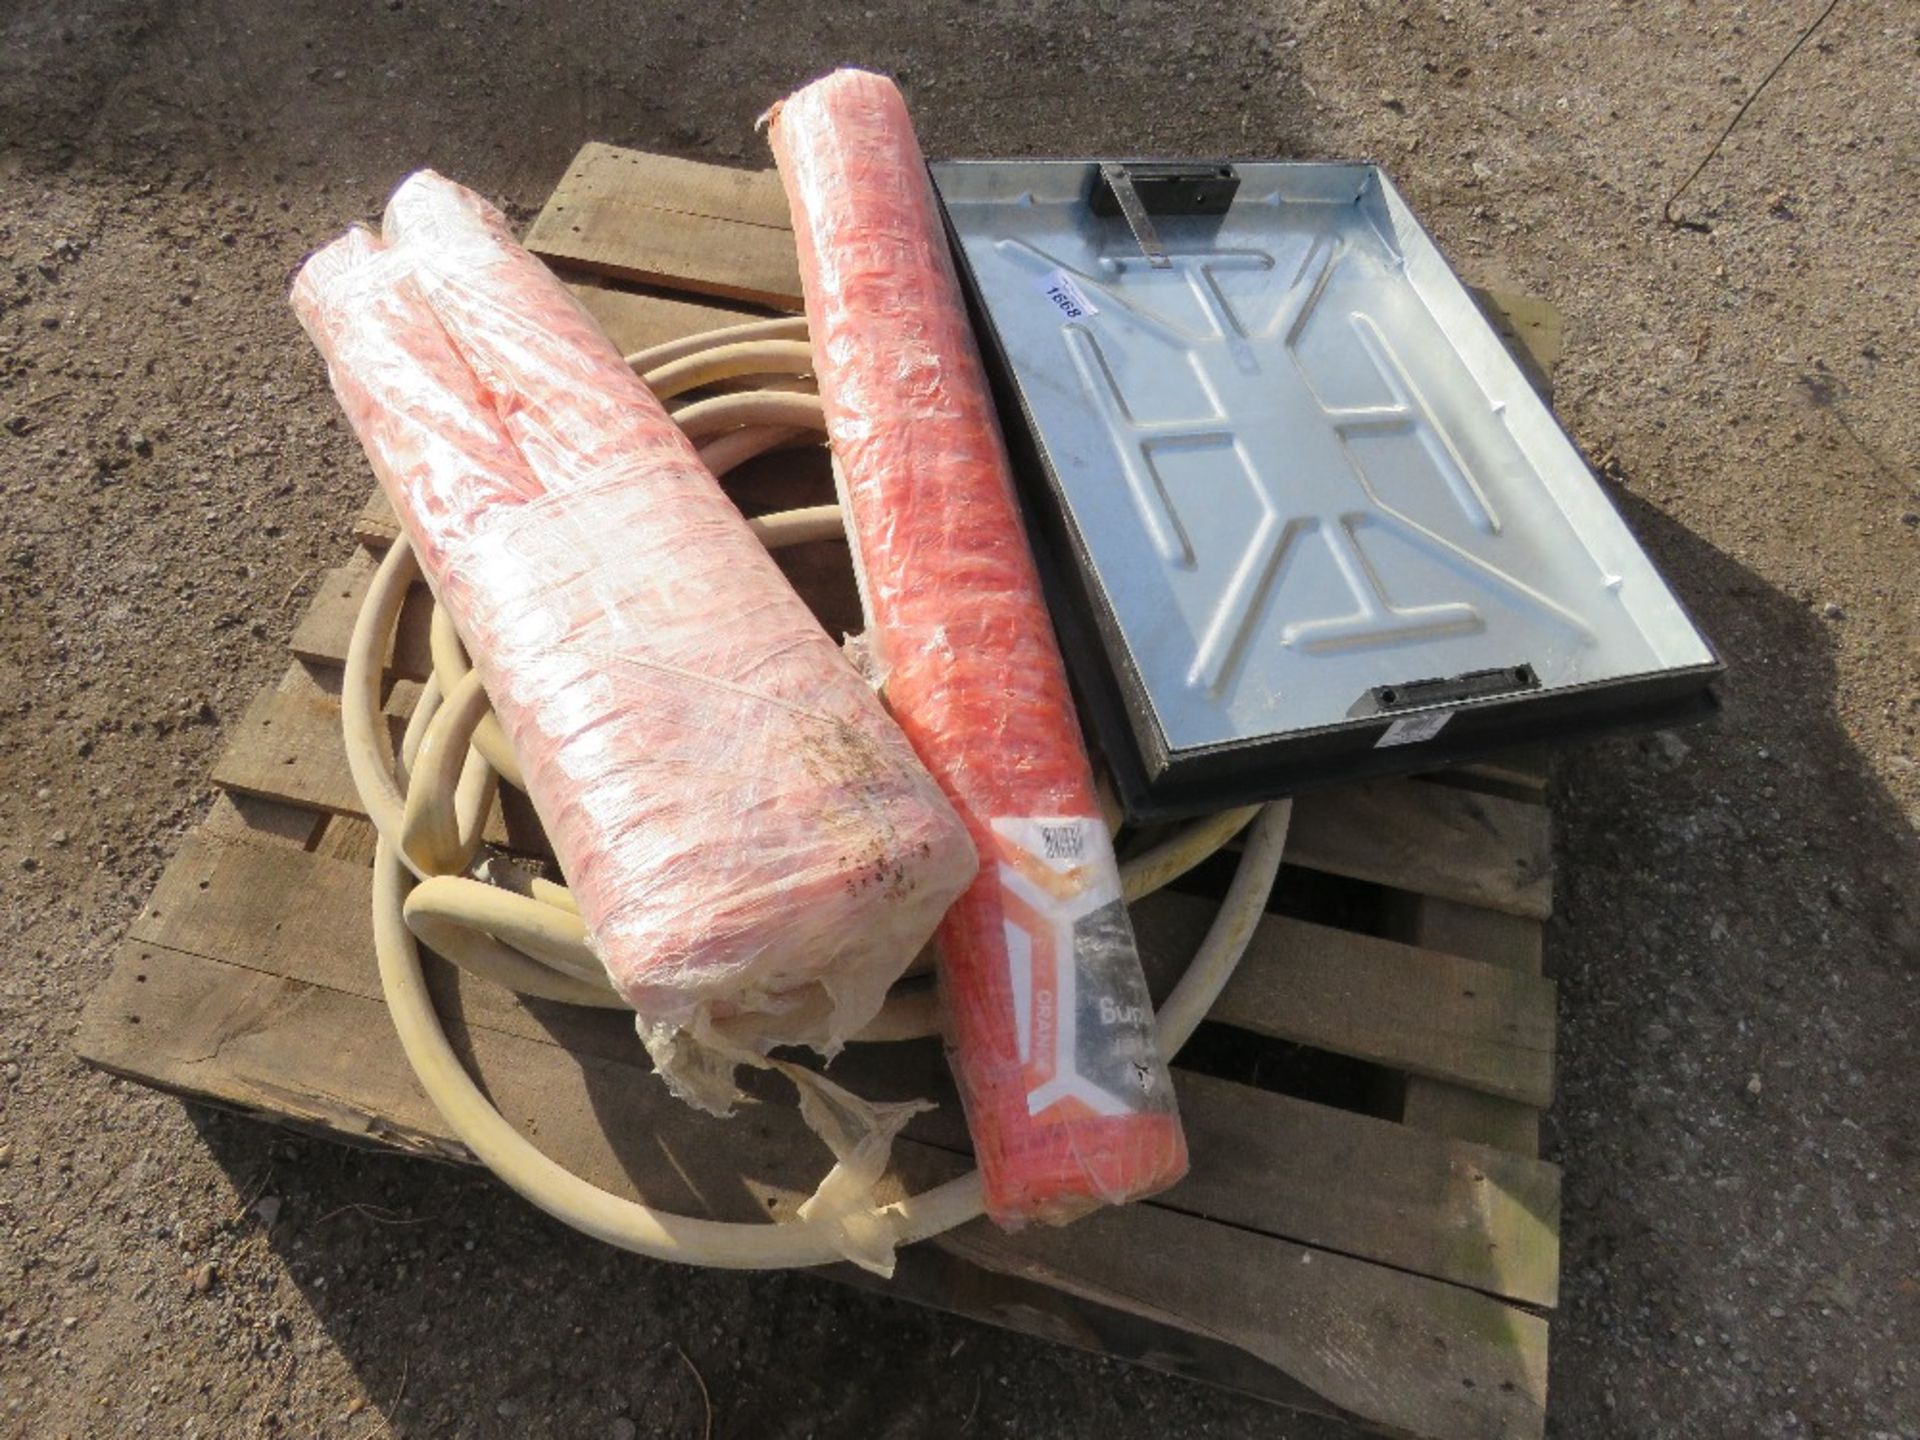 MANHOLE TOP, AIR HOSE PLUS 3 X SAFETY NETTING ROLLS. THIS LOT IS SOLD UNDER THE AUCTIONEERS MARGI